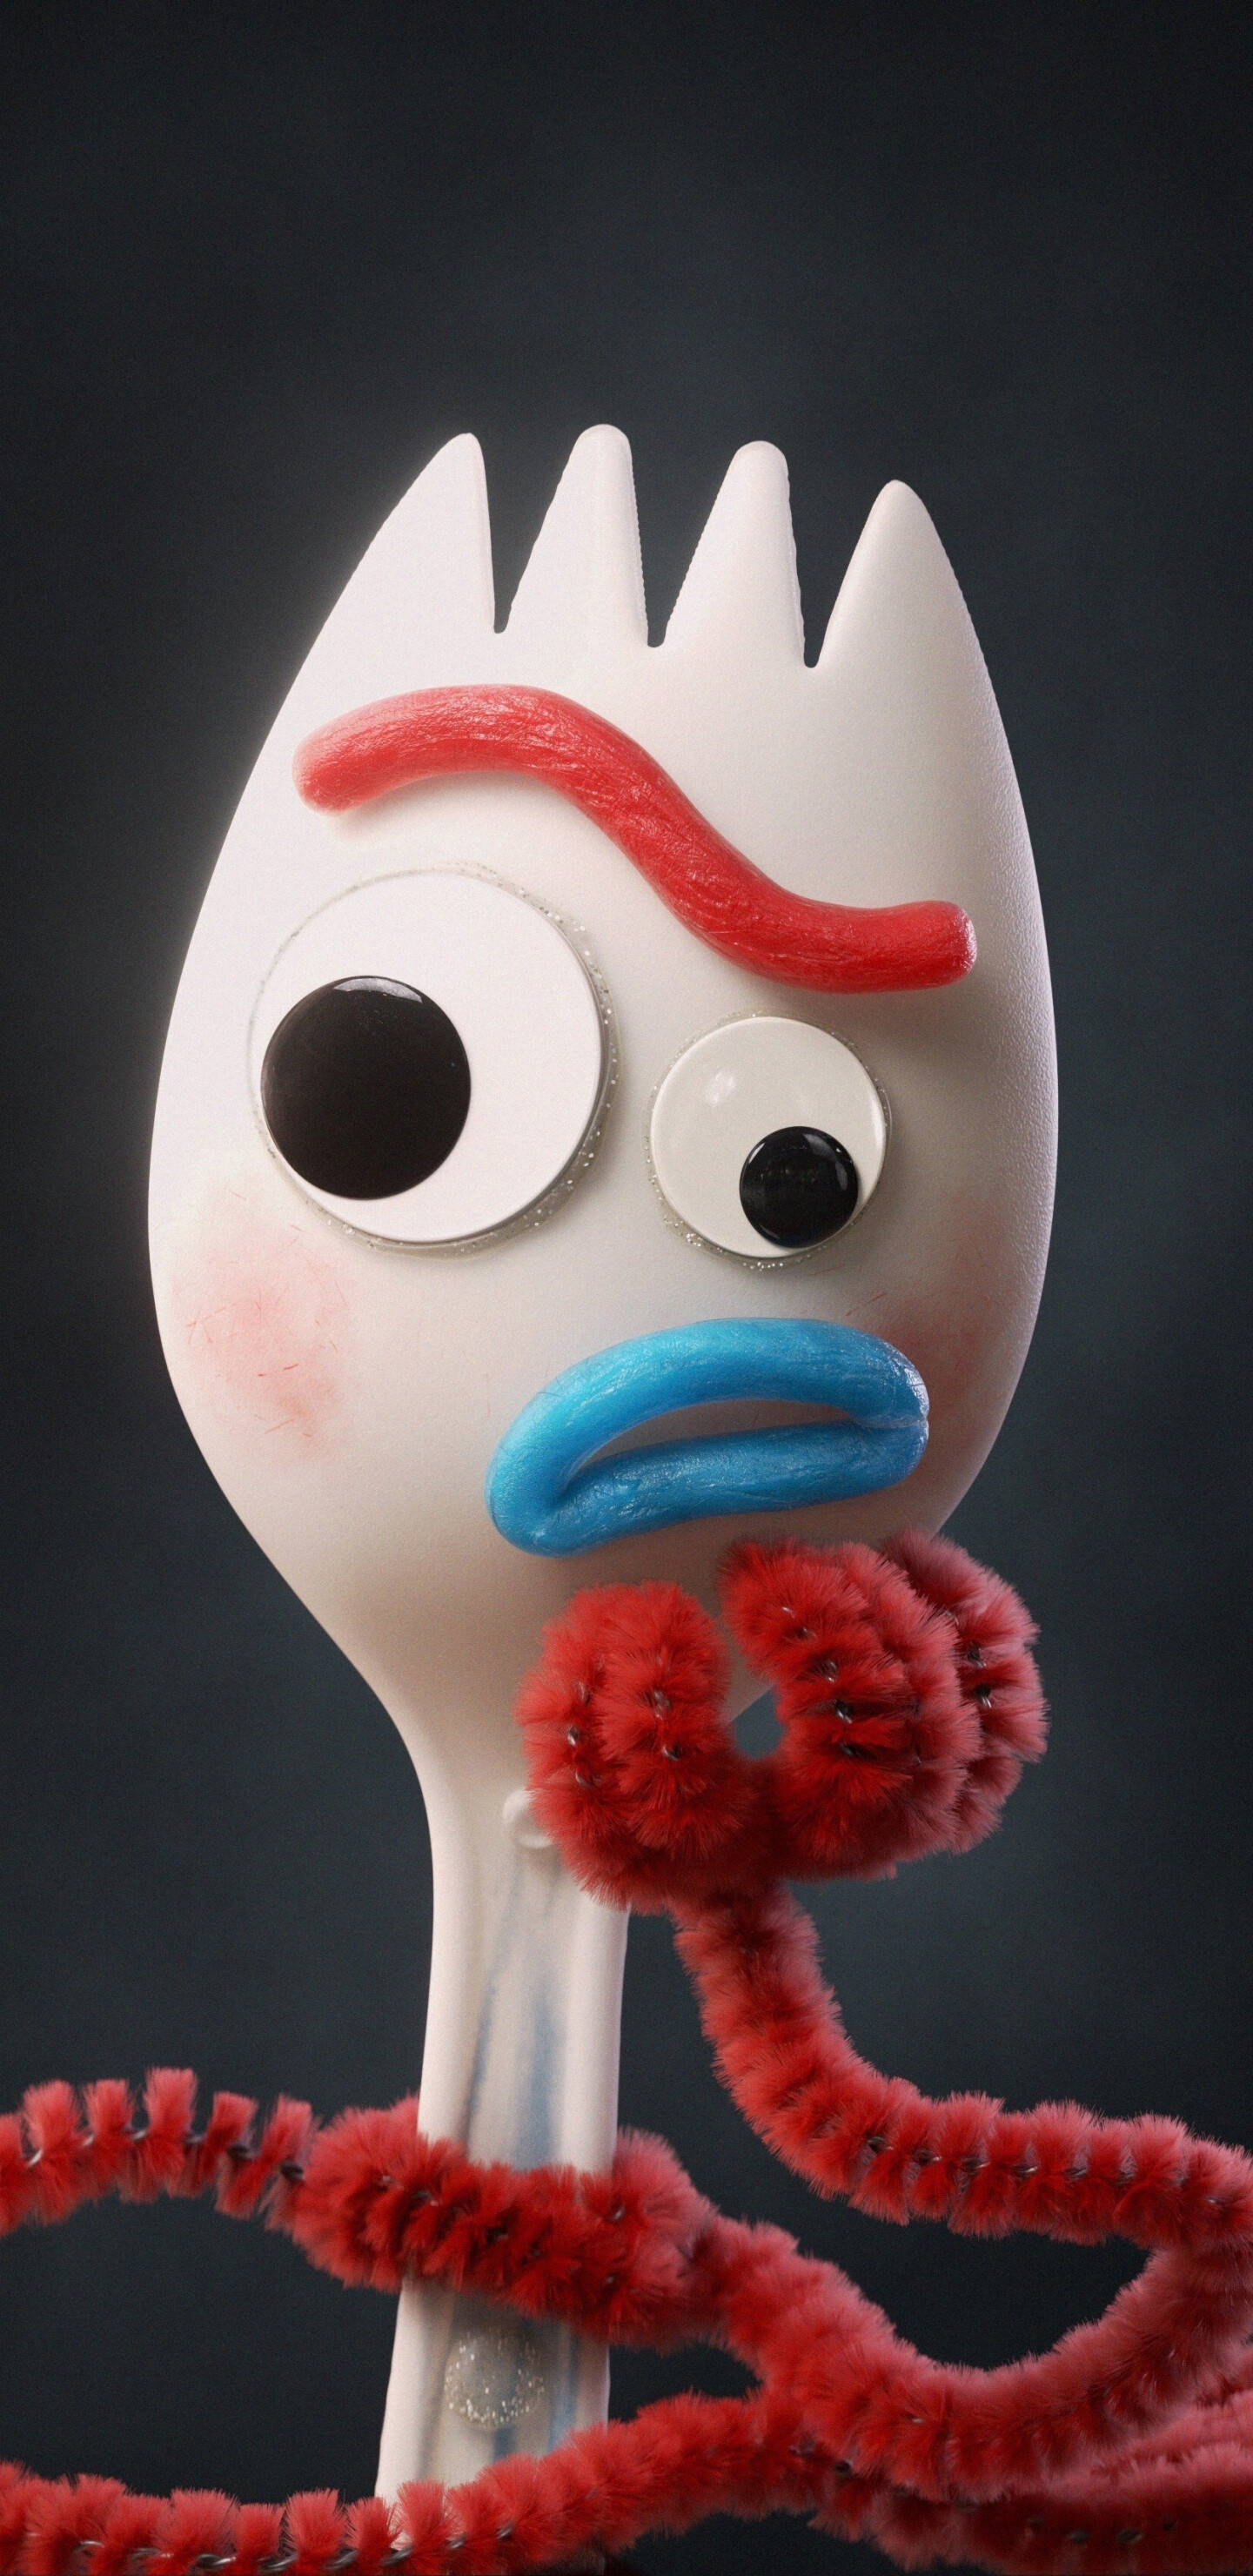 Toy Story: Forky, a handcrafted toy from a plastic spork by Bonnie Anderson, Movie. 1440x2960 HD Wallpaper.